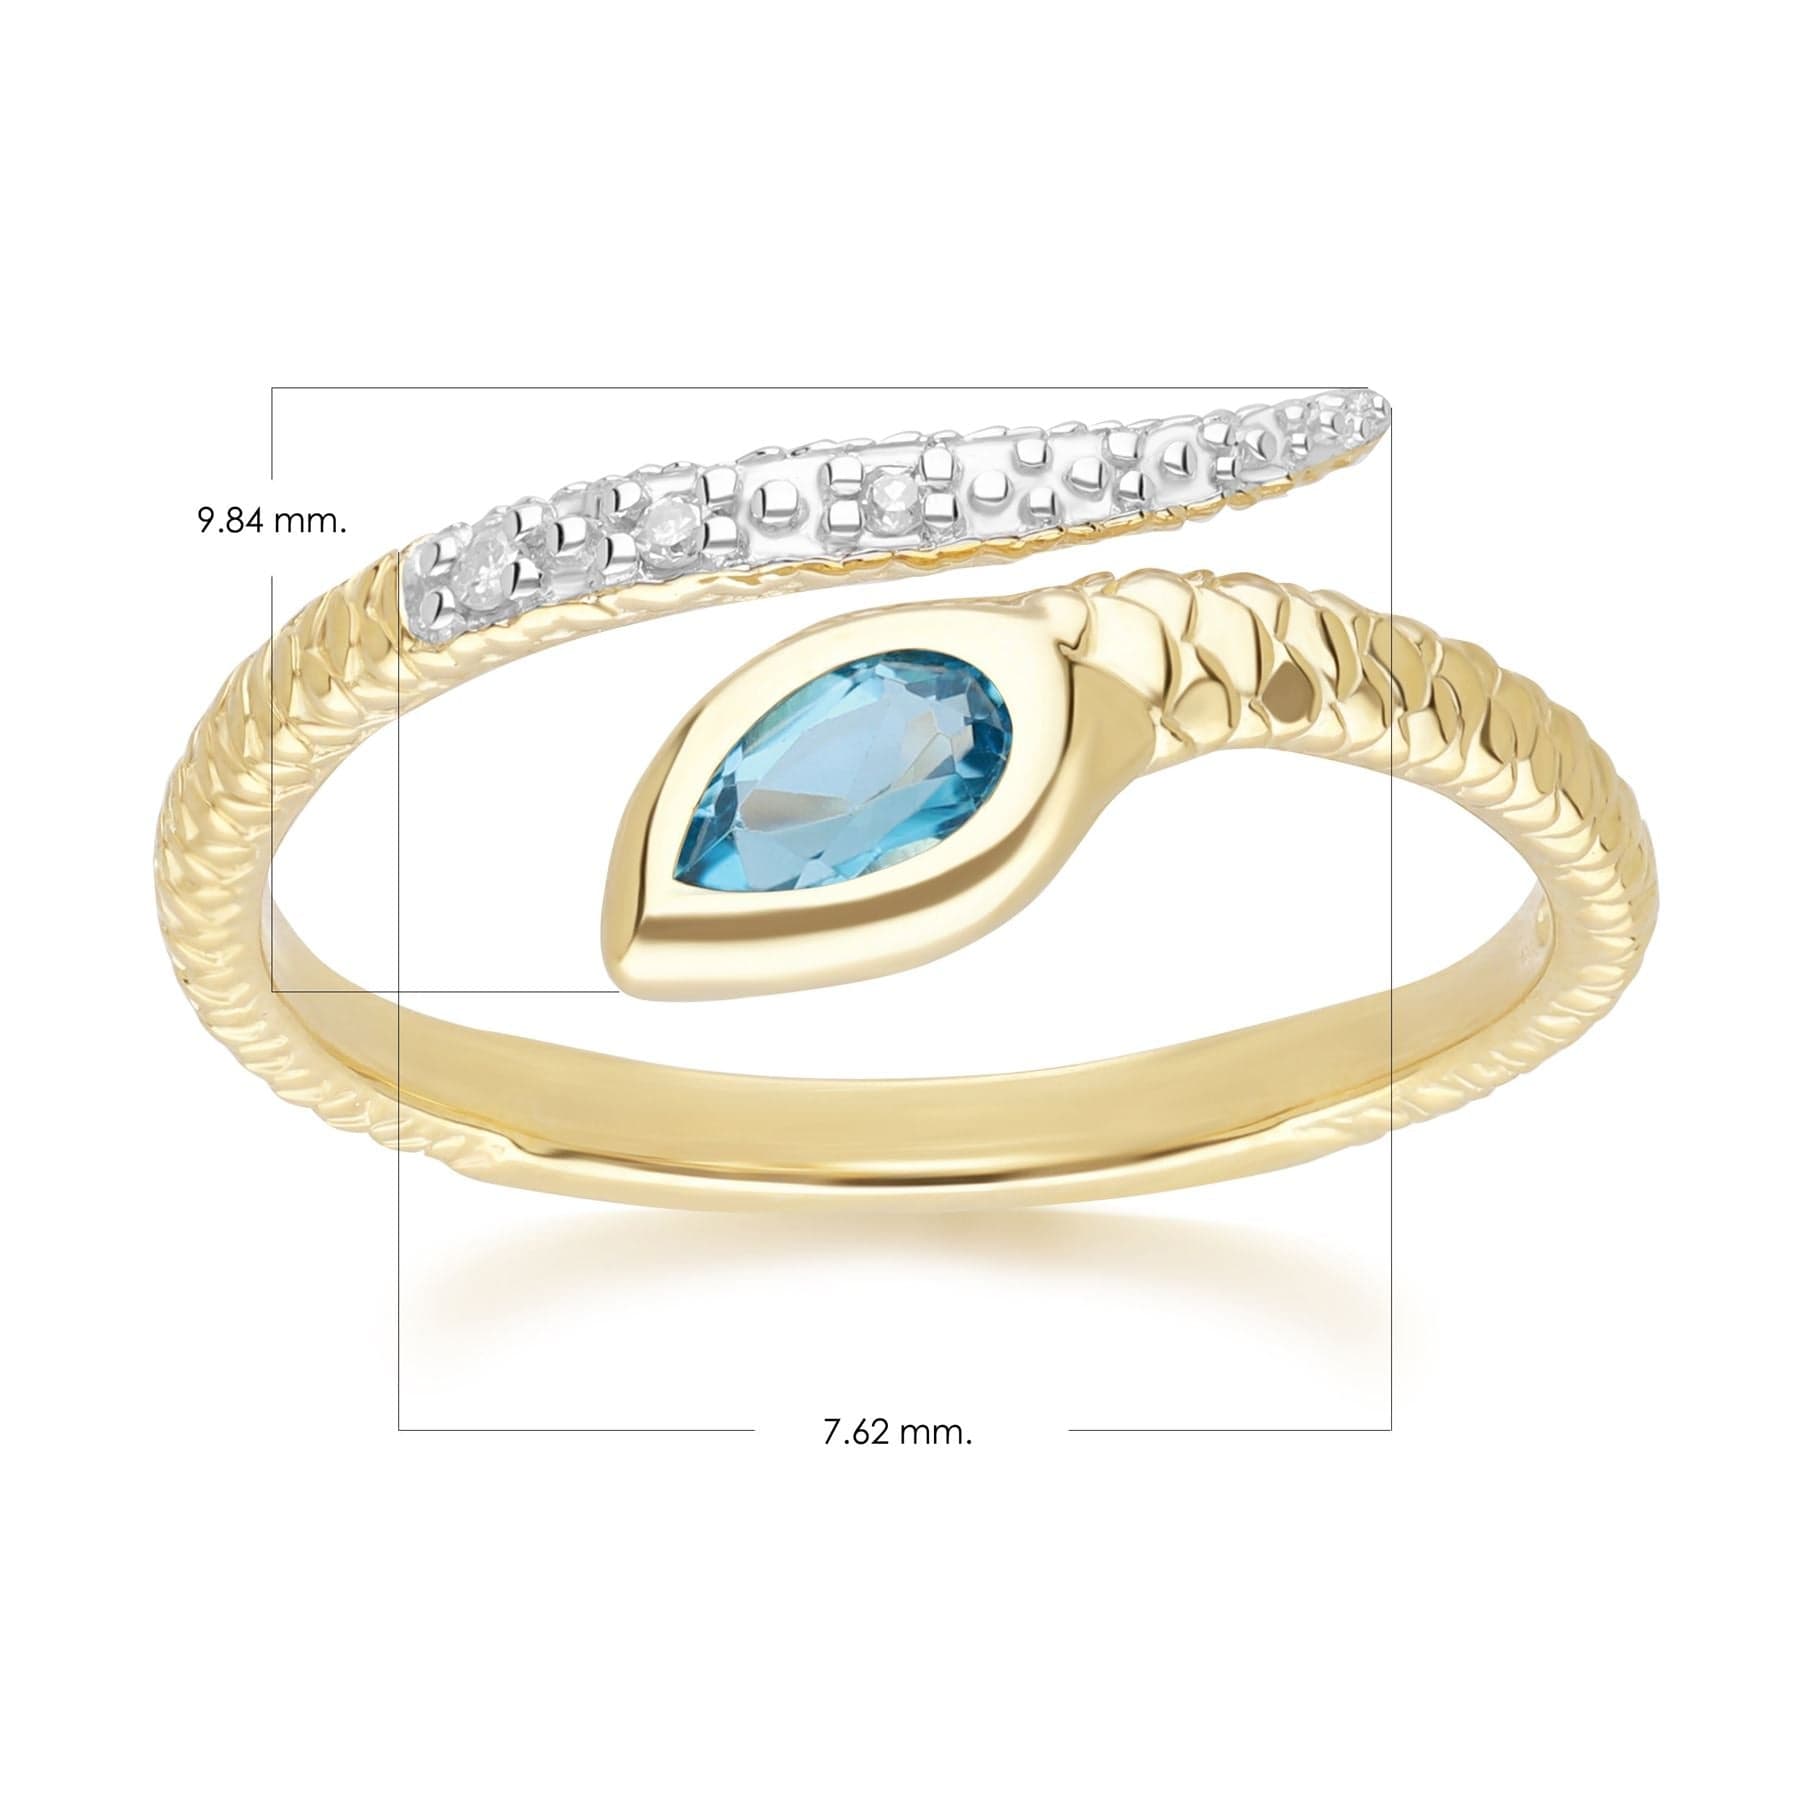 133R9812029 ECFEW™ London Blue Topaz & Diamond Snake Ring in 9ct Yellow Gold Dimensions